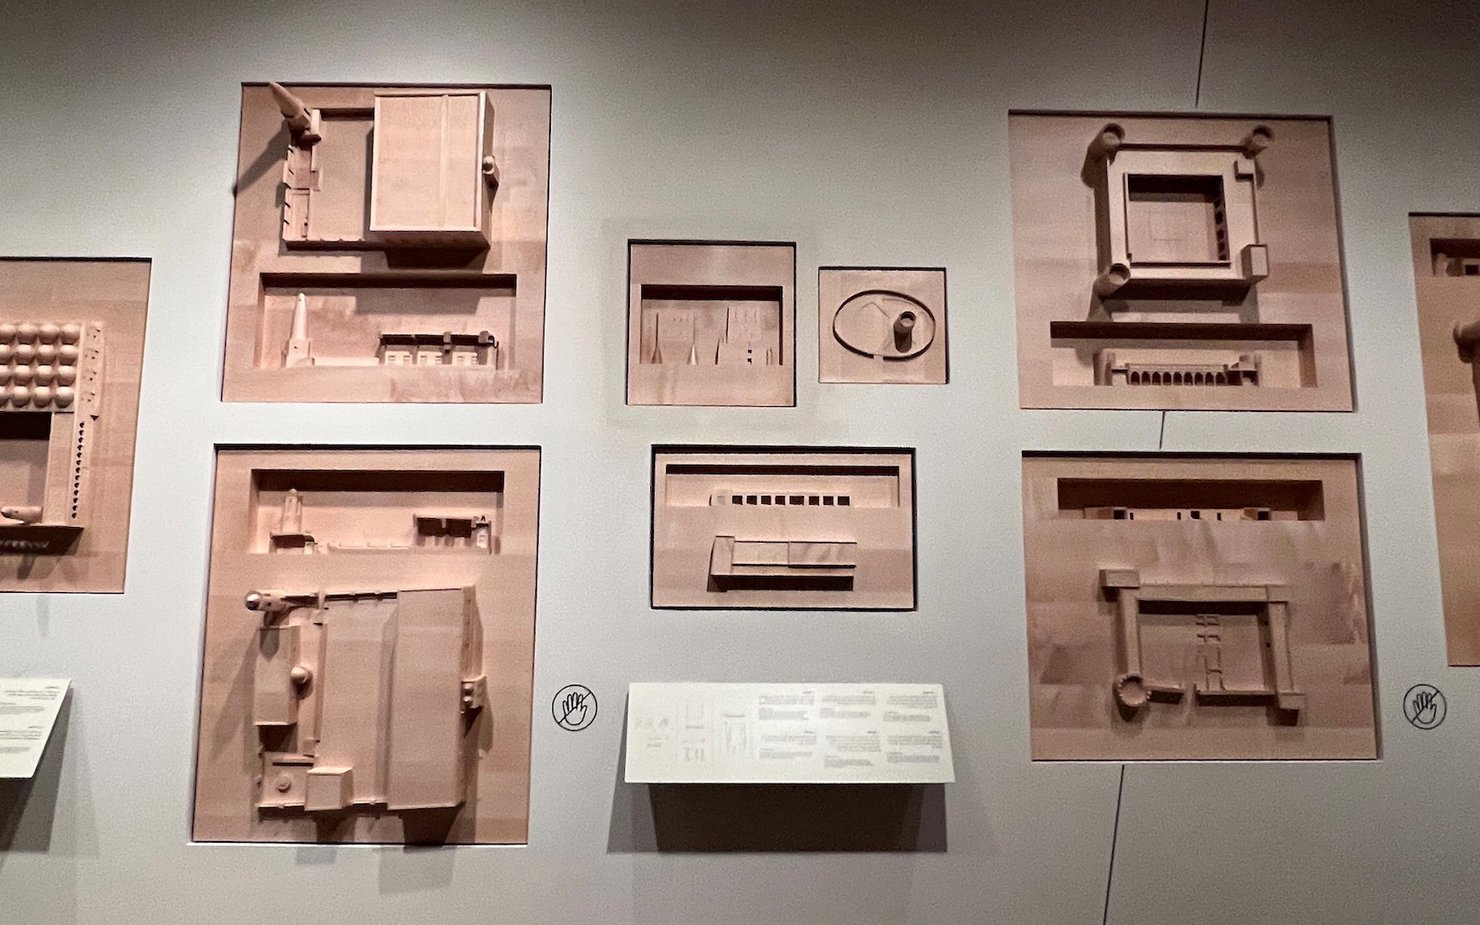 Museum display of three dimensional architectural printing models of Qatar's architecture